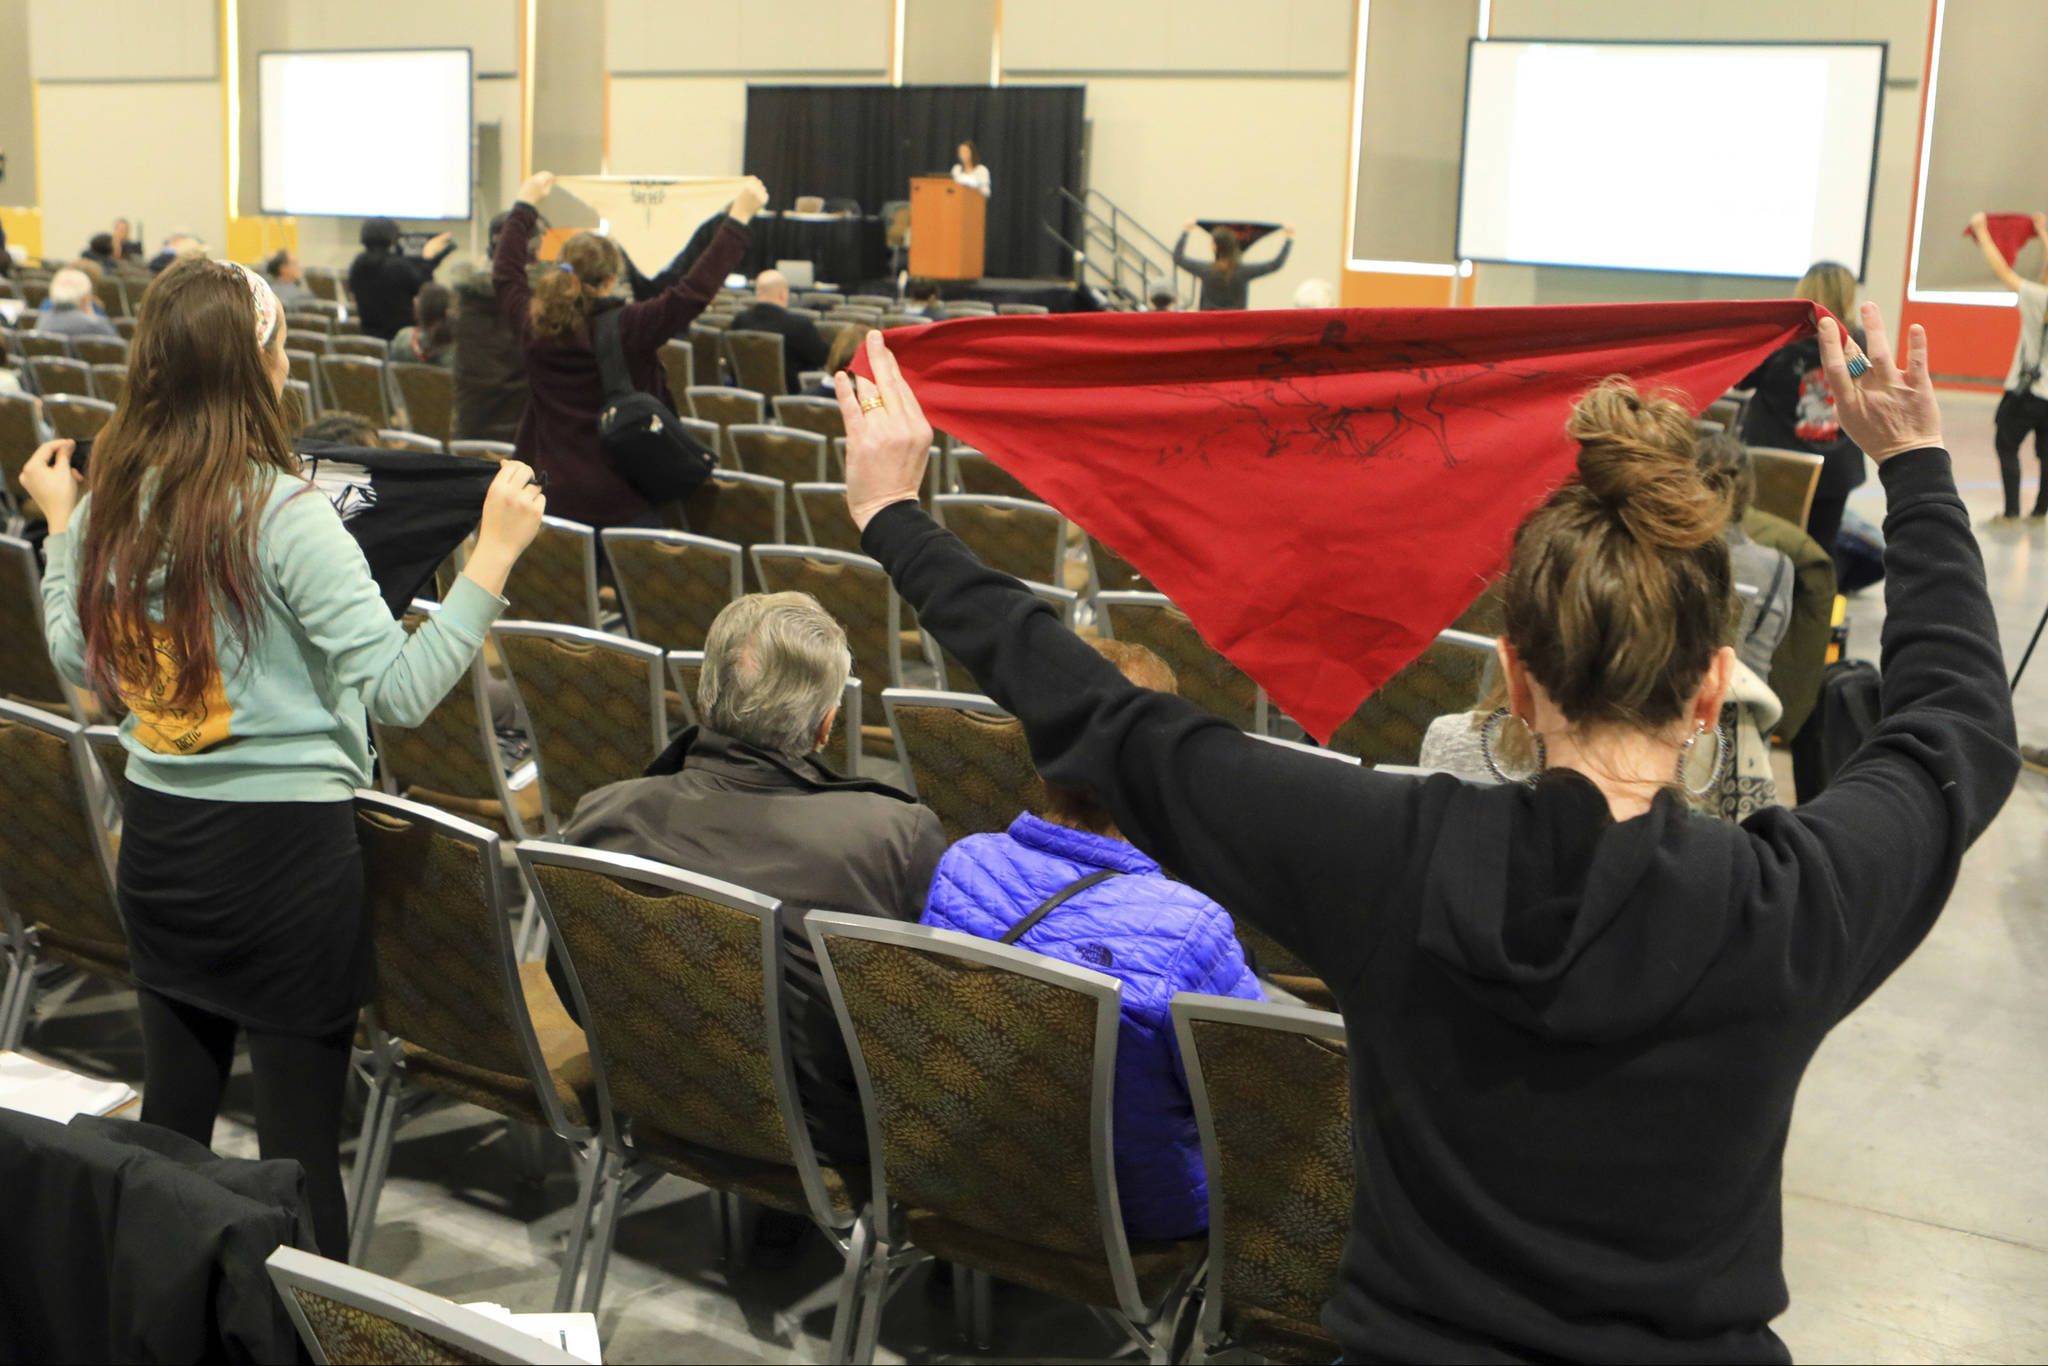 In this Feb. 11, 2019 file photo, protesters hold up flags during a public hearing on a draft environmental plan on proposed petroleum leasing within Alaska’s Arctic National Wildlife Refuge in Anchorage, Alaska. Conservationists will try to persuade a U.S. judge to stop the Trump administration from issuing leases to oil and gas companies in the Arctic National Wildlife Refuge. The Anchorage Daily News reported that the videoconference Monday, Jan. 4, 2021, in U.S. District Court in Anchorage is expected to determine whether the Bureau of Land Management can open bids in an online lease sale scheduled for Wednesday. The agency has offered 10-year leases on 22 tracts covering about 1,563 square miles in the coastal plain, which accounts for about 5% of the refuge’s area. (AP Photo/Dan Joling, File)